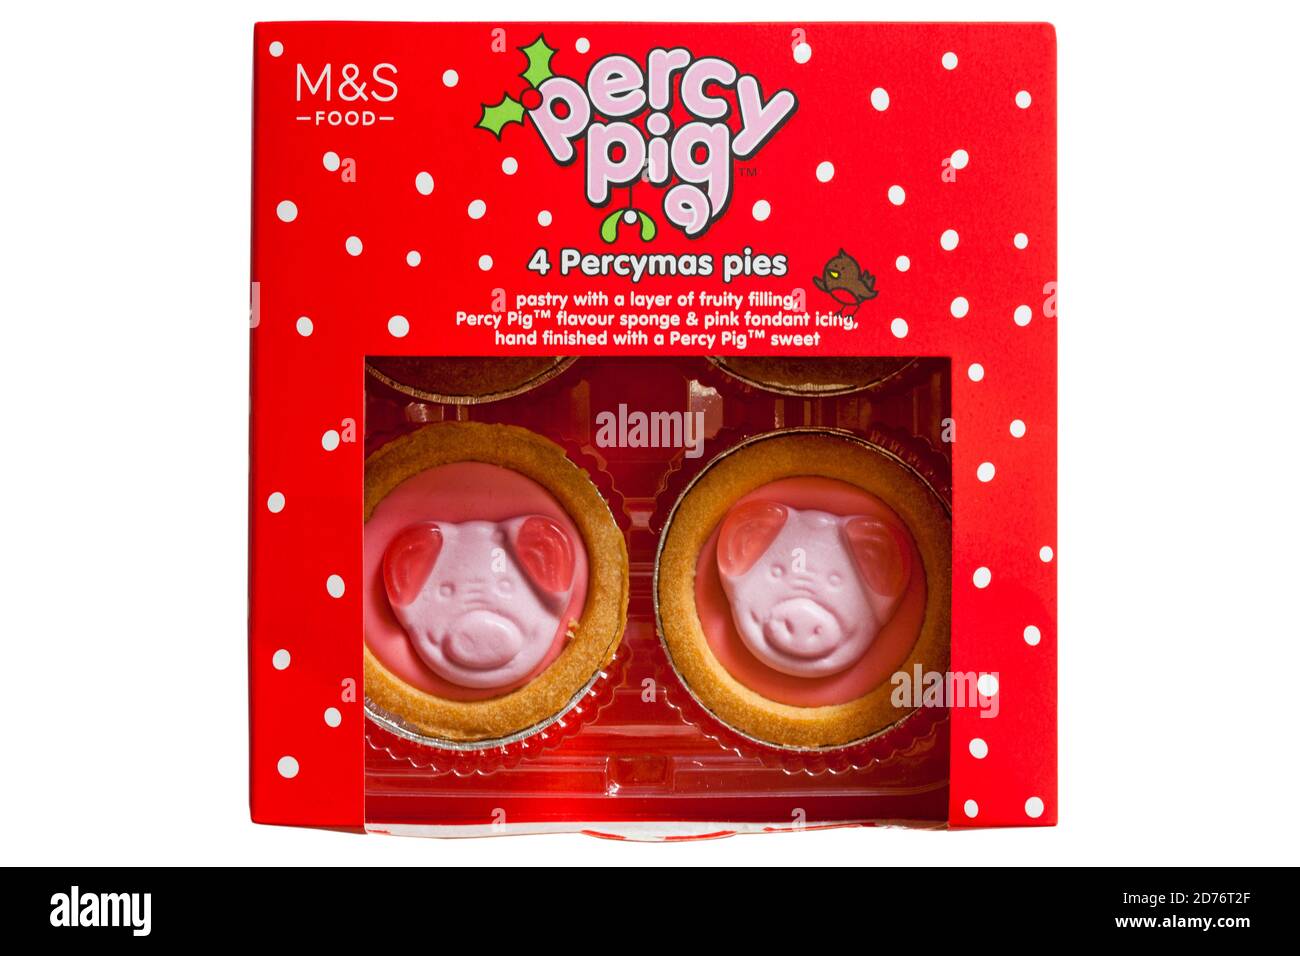 Box of M&S Percy Pig Percymas Pies isolated on white background Stock Photo